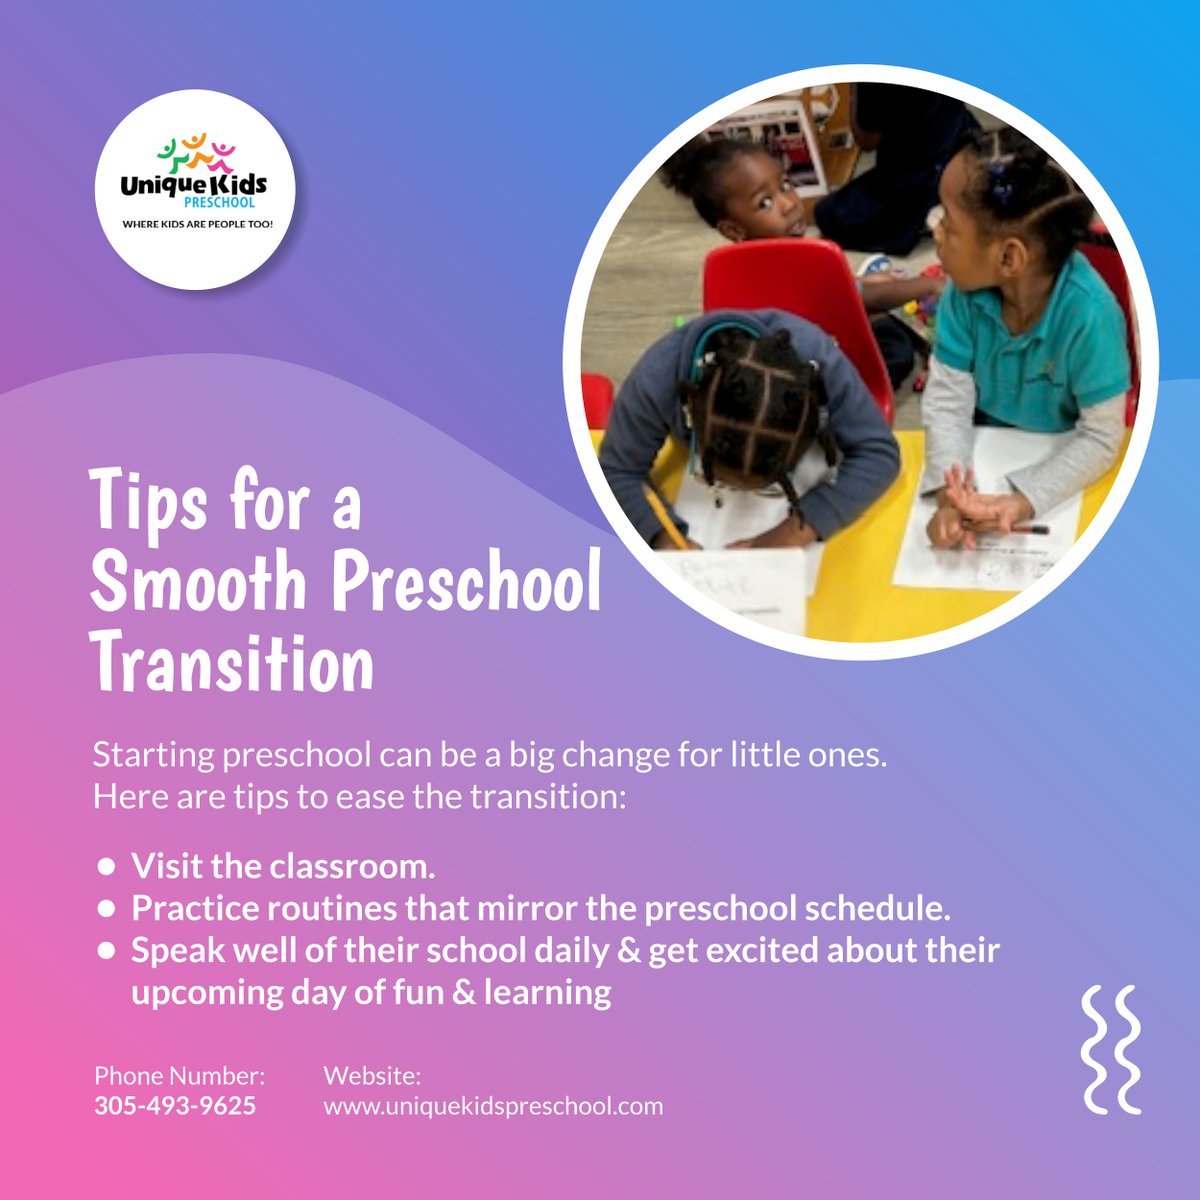 Making preschool a positive experience! These tips can help your child feel comfortable and confident on their first day. 

#instafollow #Earlychildhoodeducation #Miami #Education #Children #Preschool #MiamiGardensFL #PreschoolTransition